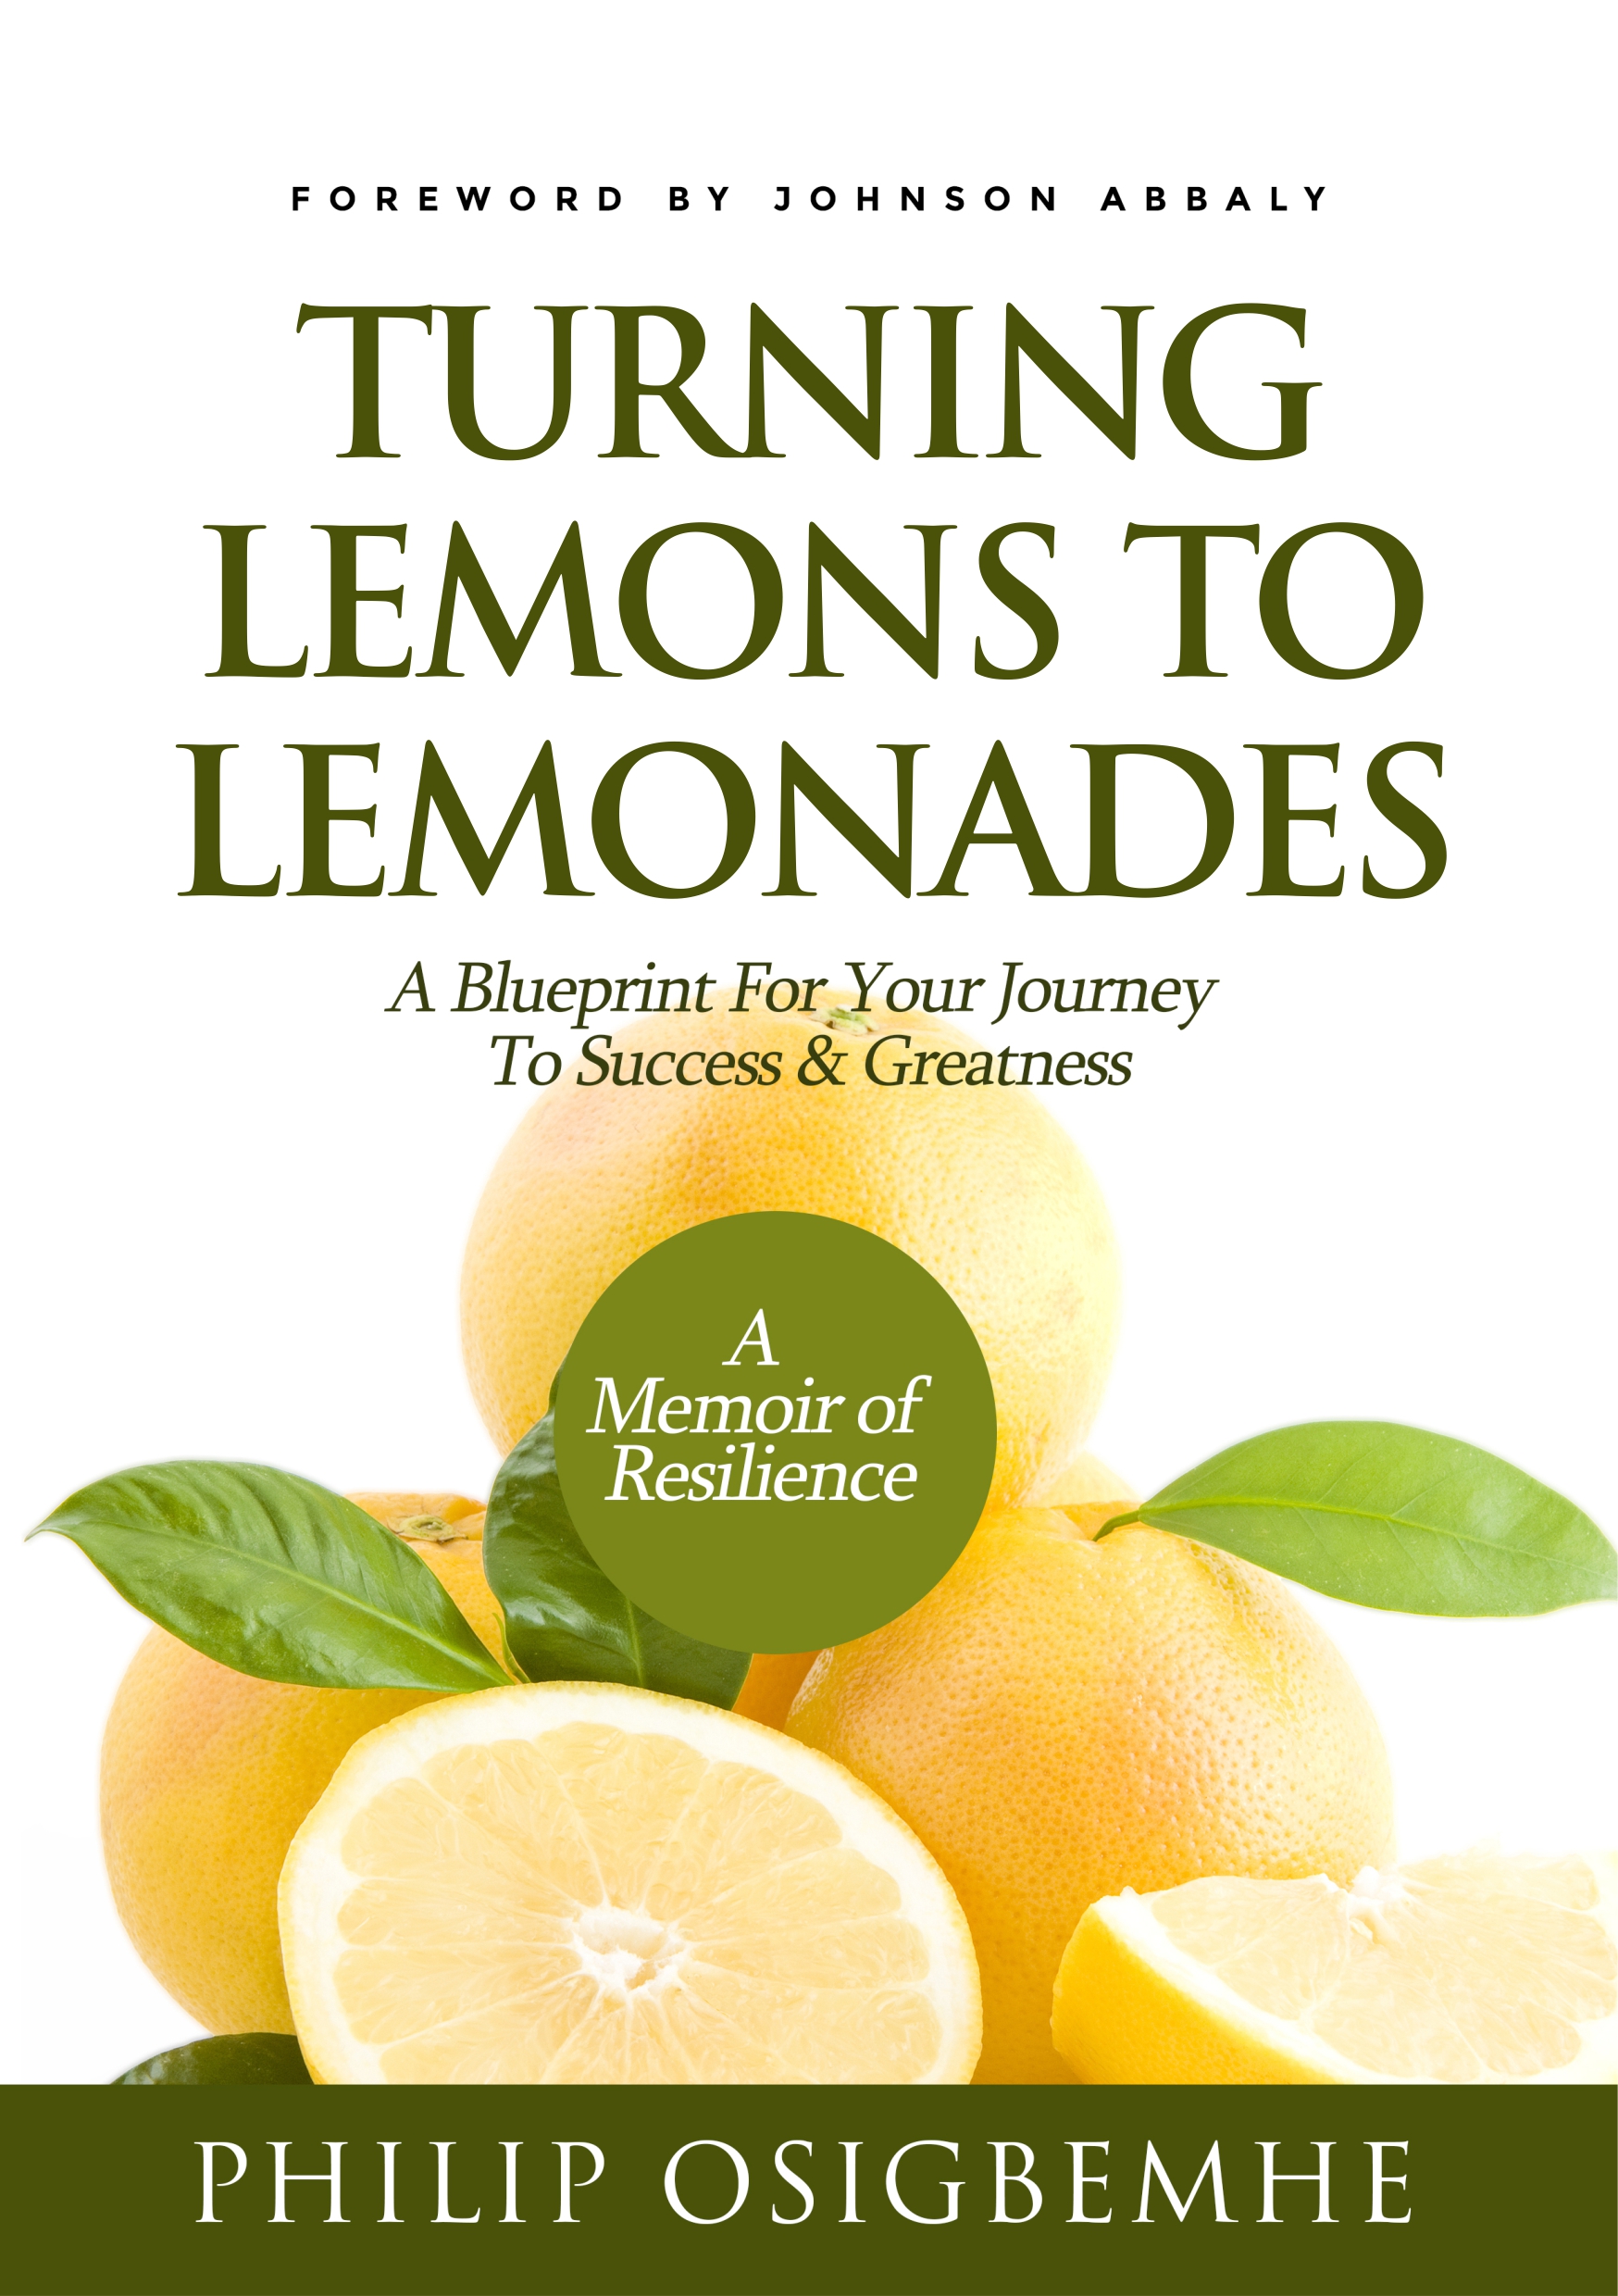 Turning-Lemons-to-Lemonades--A-Blueprint-For-Your-Journey-to-Success-and-Greatness